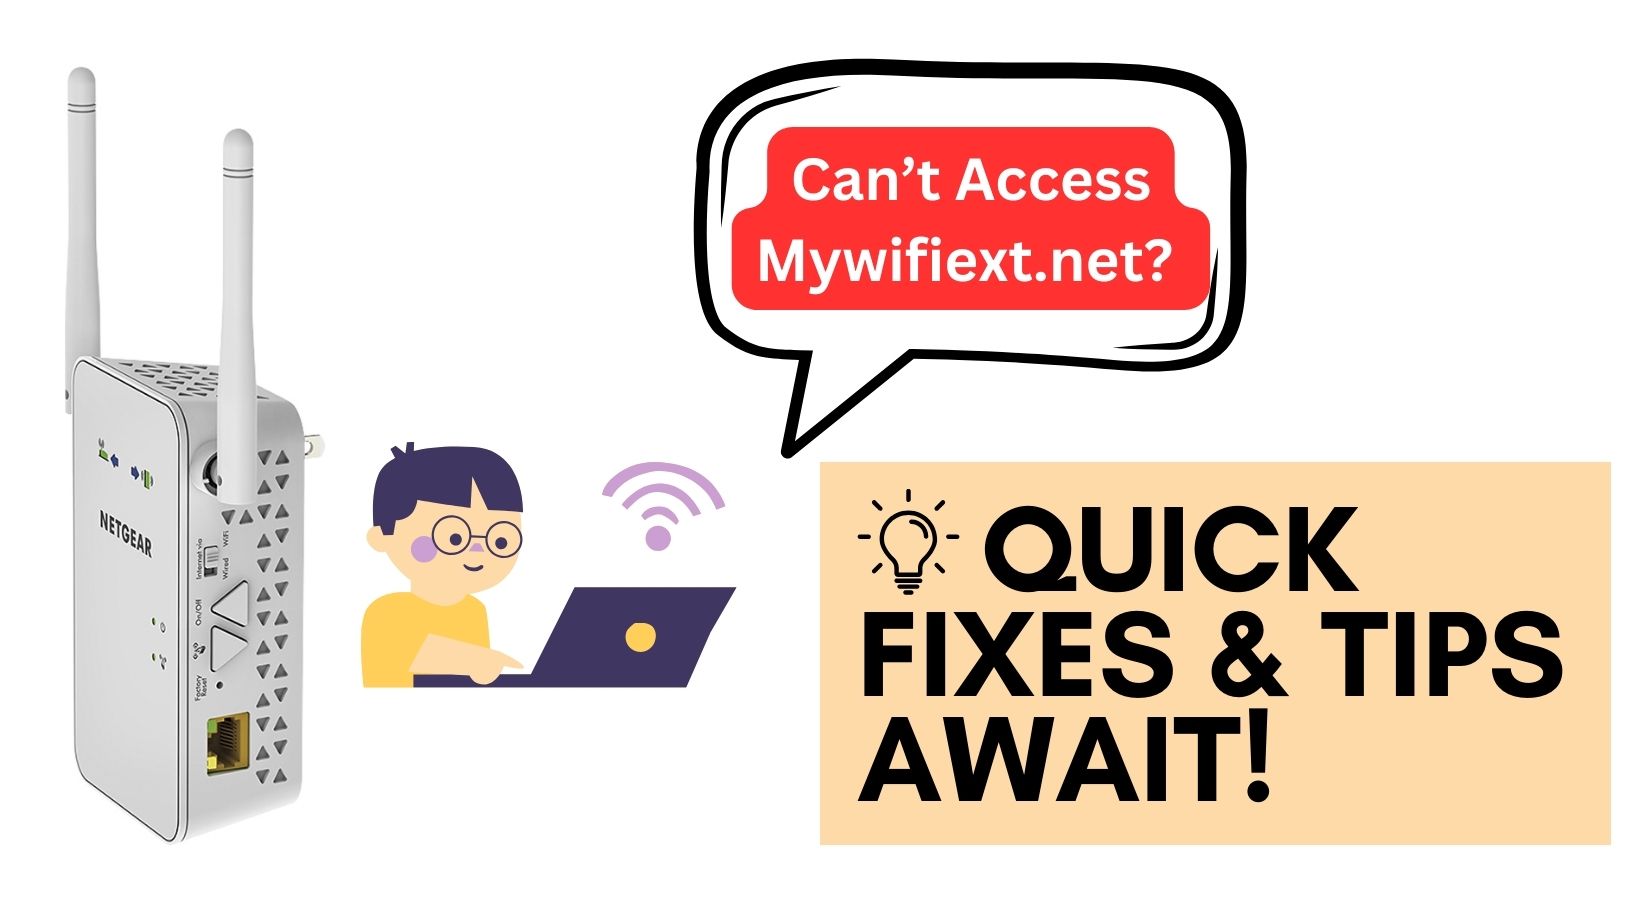 You are currently viewing Can’t Access Mywifiext.net? Quick Fixes & Tips Await! 